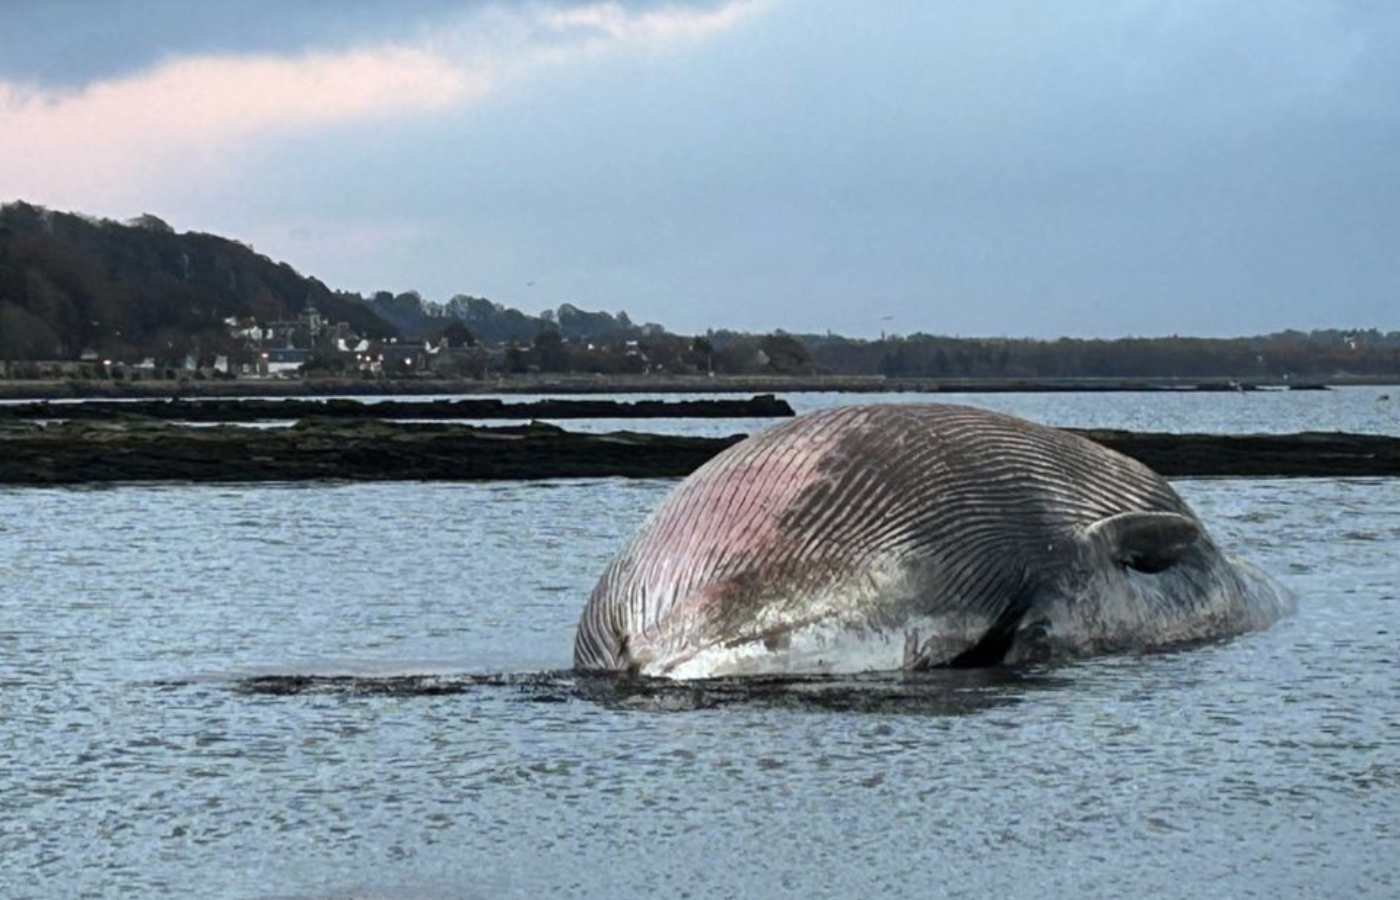 The 17-metre fin whale remains on the shoreline to decompose naturally. Photo: Culross Stables Community Hub/Facebook.